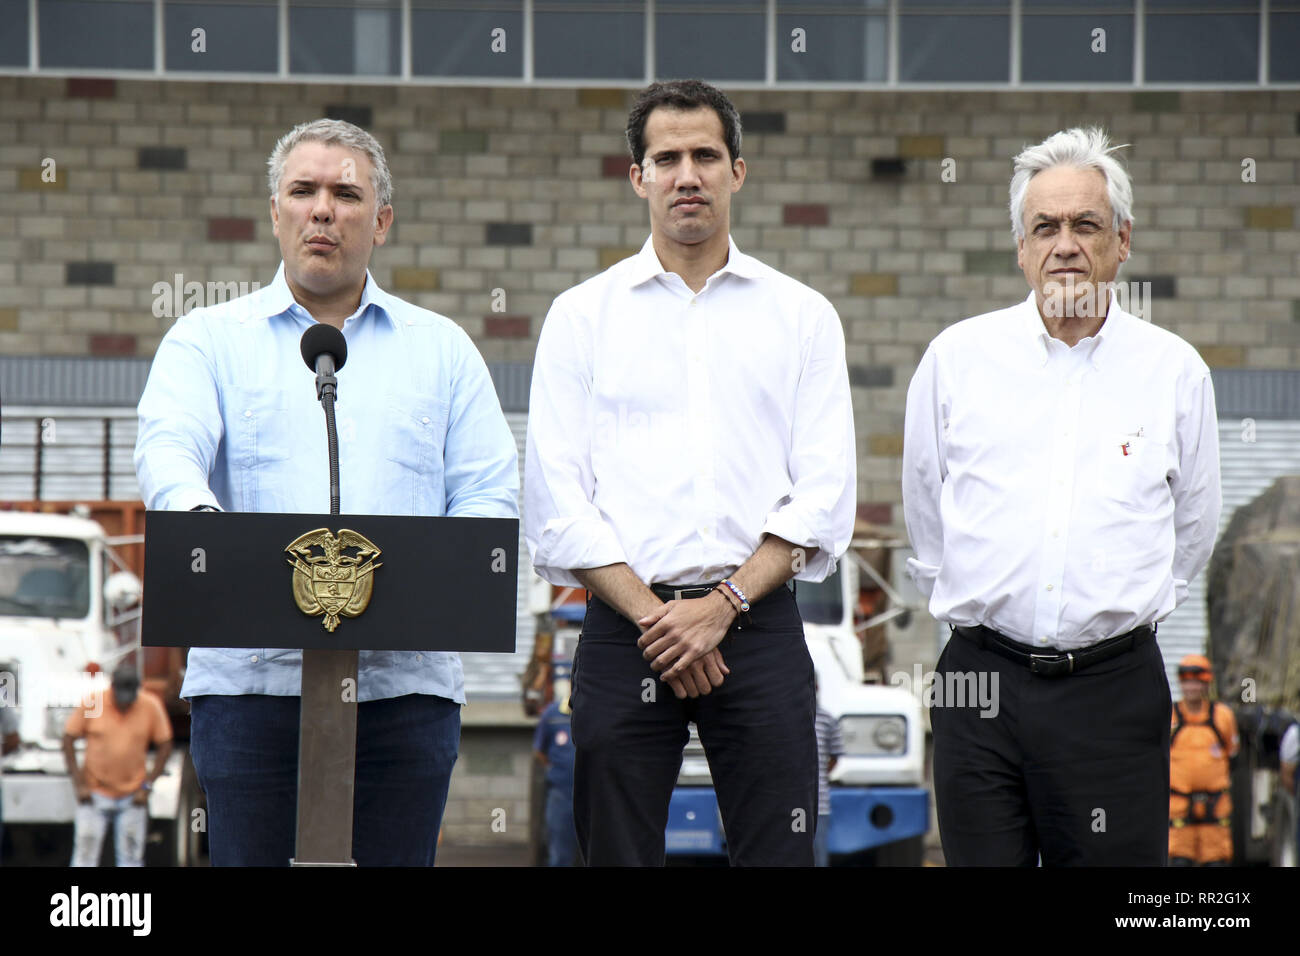 Caracas, Venezuela. 23rd Feb, 2019. Venezuelan opposition leader Juan Guaido (C), flanked by presidents Mario Abdo Benitez (2nd-L) of Paraguay, Ivan Duque (2nd-R) of Colombia and Sebastian Pinera (R) of Chile, and Organization of American States Secretary-General Luis Almagro (L), speaks in an official ceremony in Cucuta on the Colombian side of the Tienditas International Bridge before the attempt to cross humanitarian aid over the border into Venezuela, on February 23, 2019. US-donated humanitarian aid was ''on its way'' to Venezuela, opposition leader Juan Gauido announced Saturday as Stock Photo